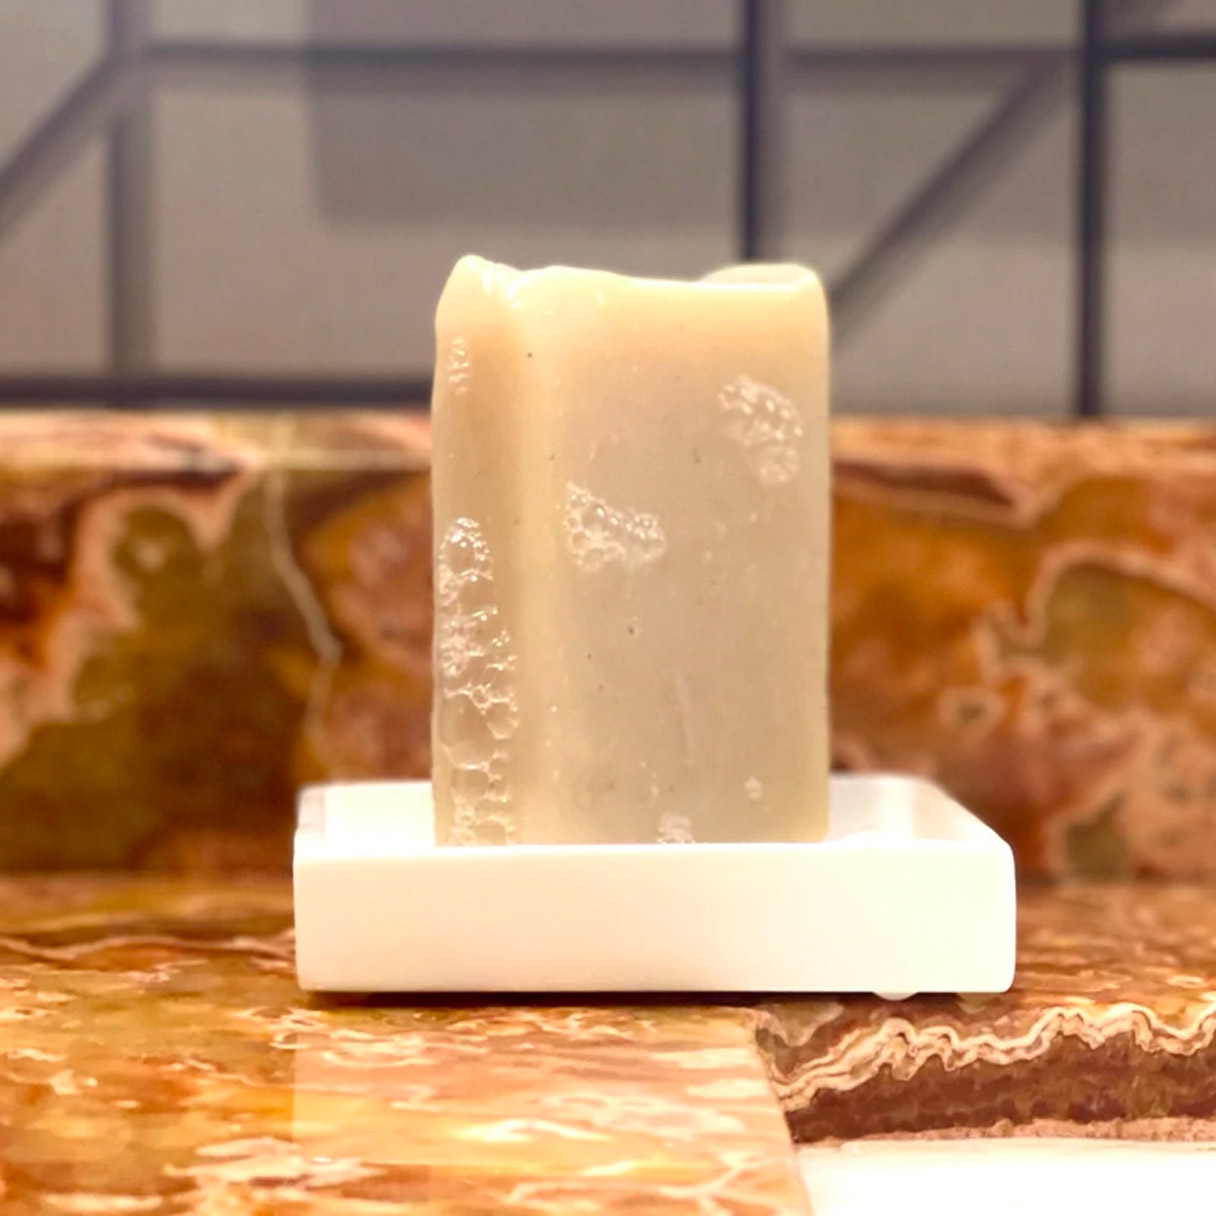 Soap That Makes You Smell Like a garage (gasoline, oil, exhaust)